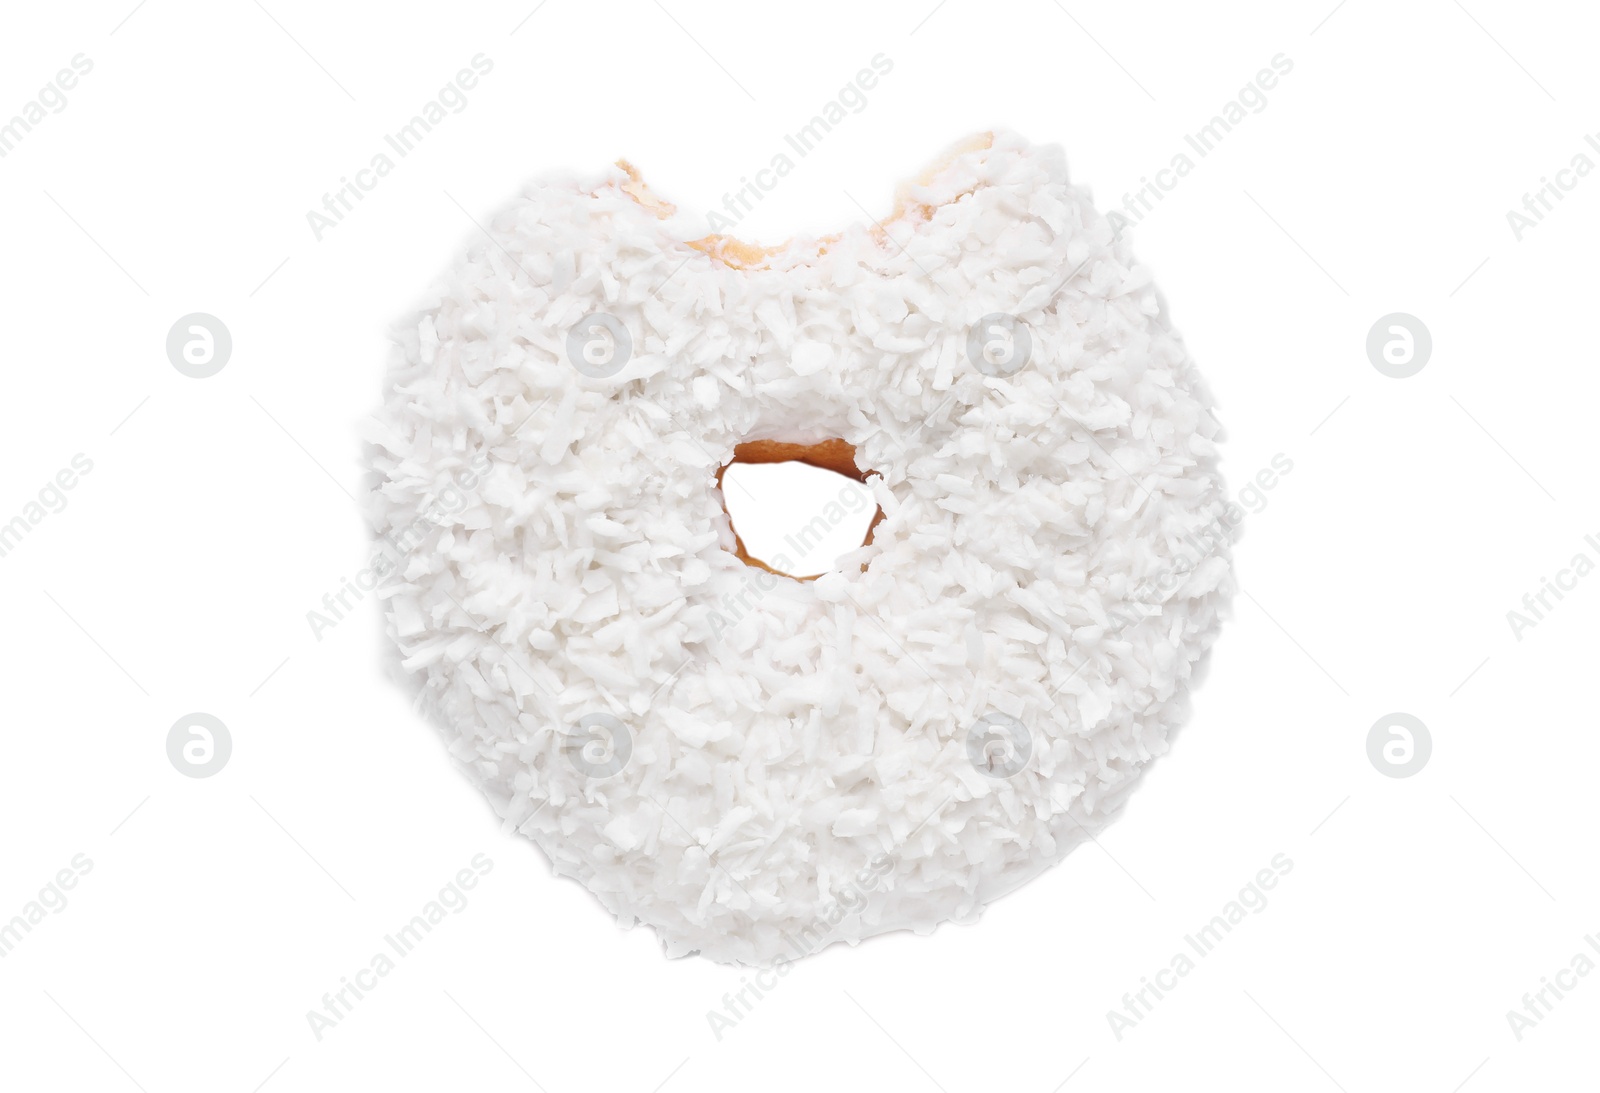 Photo of Tasty bitten glazed donut decorated with coconut shavings isolated on white, top view